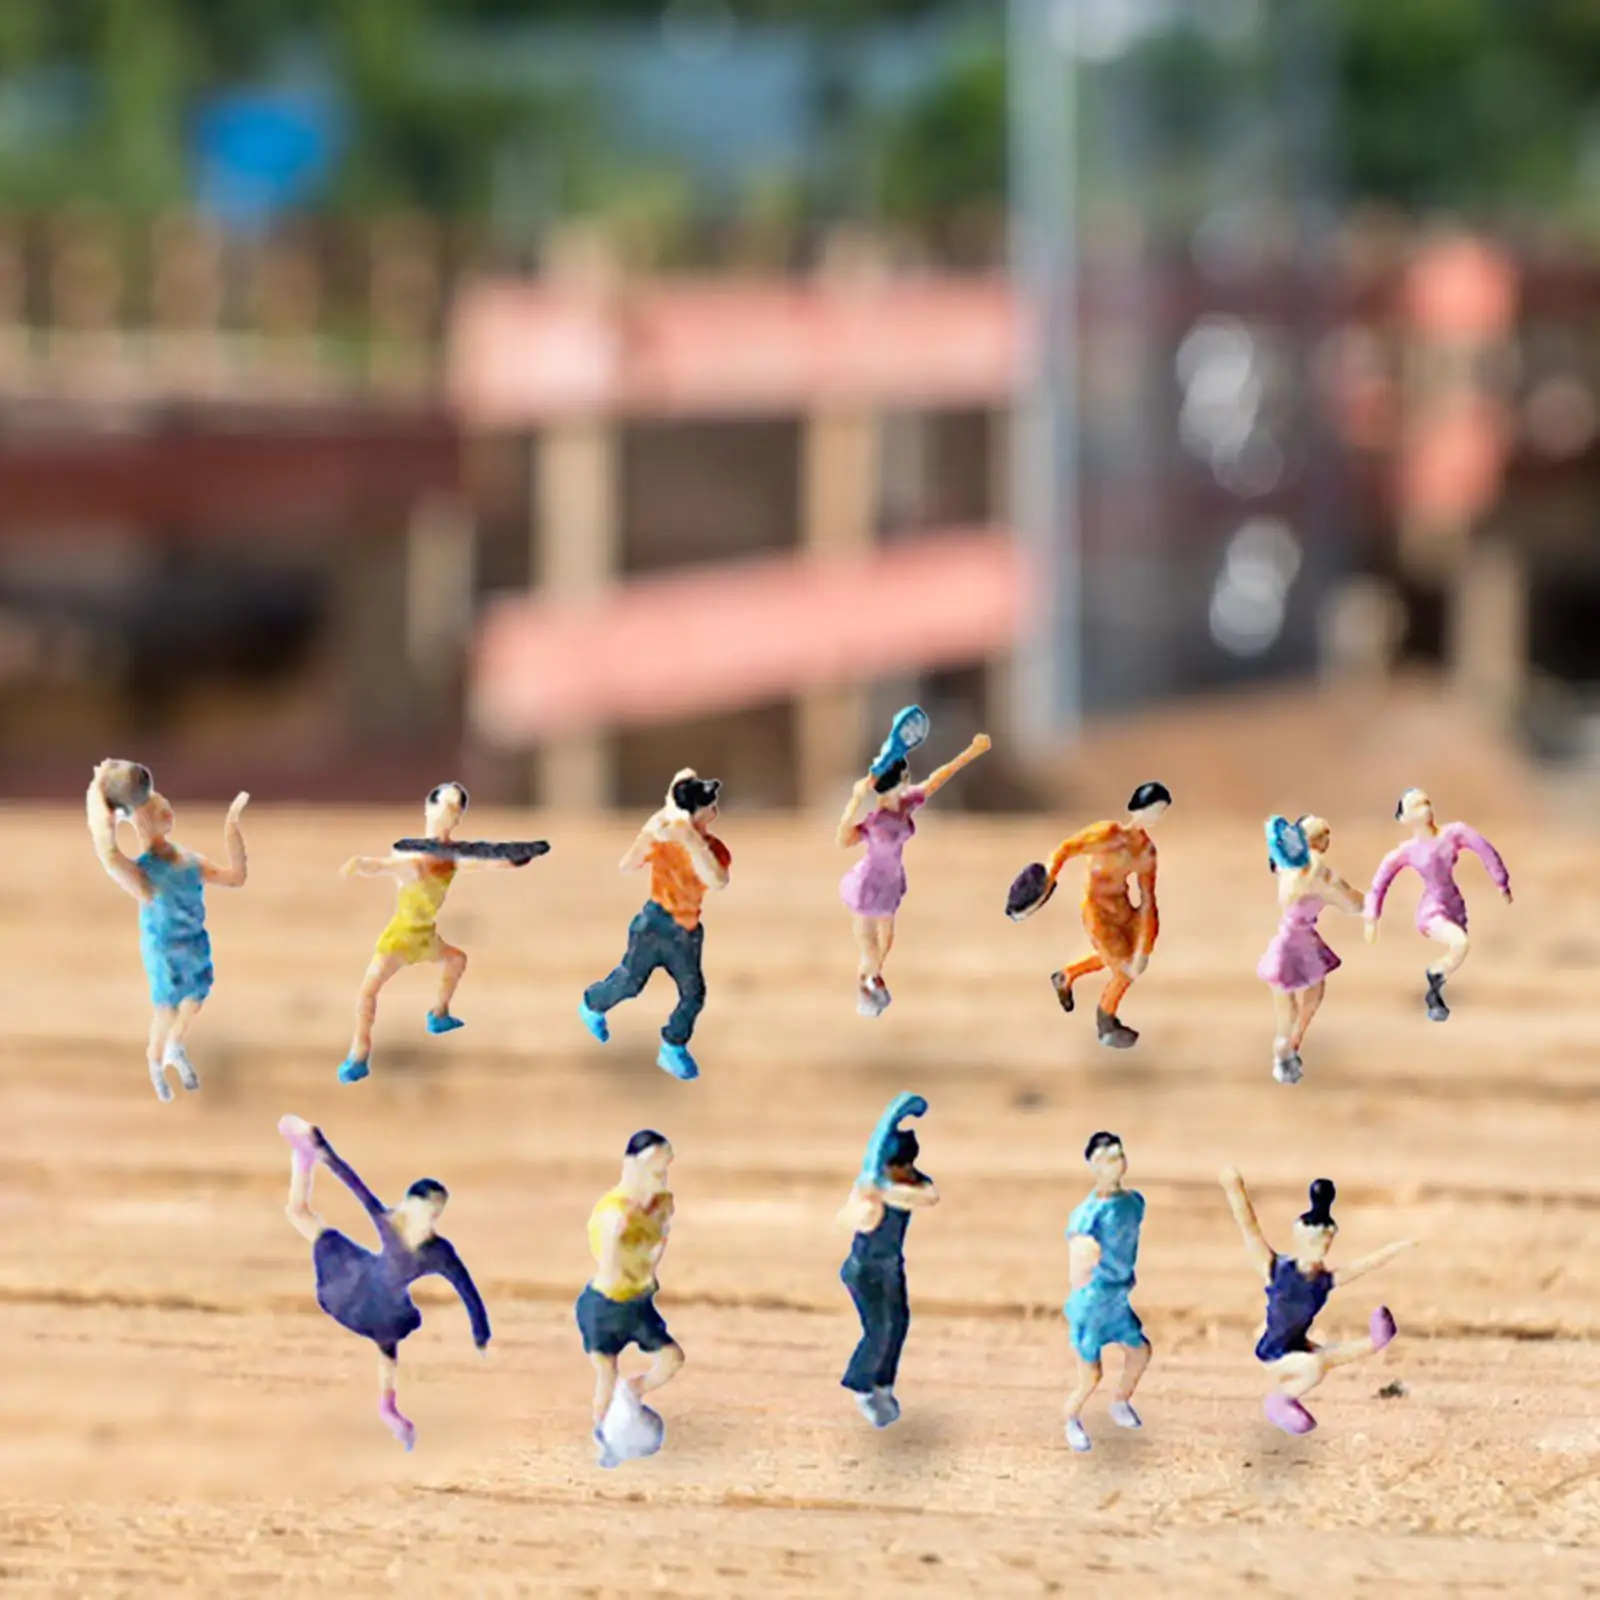 Mini Figurines Player Figure Tiny People DIY Layout Scenery Accs Miniature Sport Player Figurines for Micro Landscapes Decor